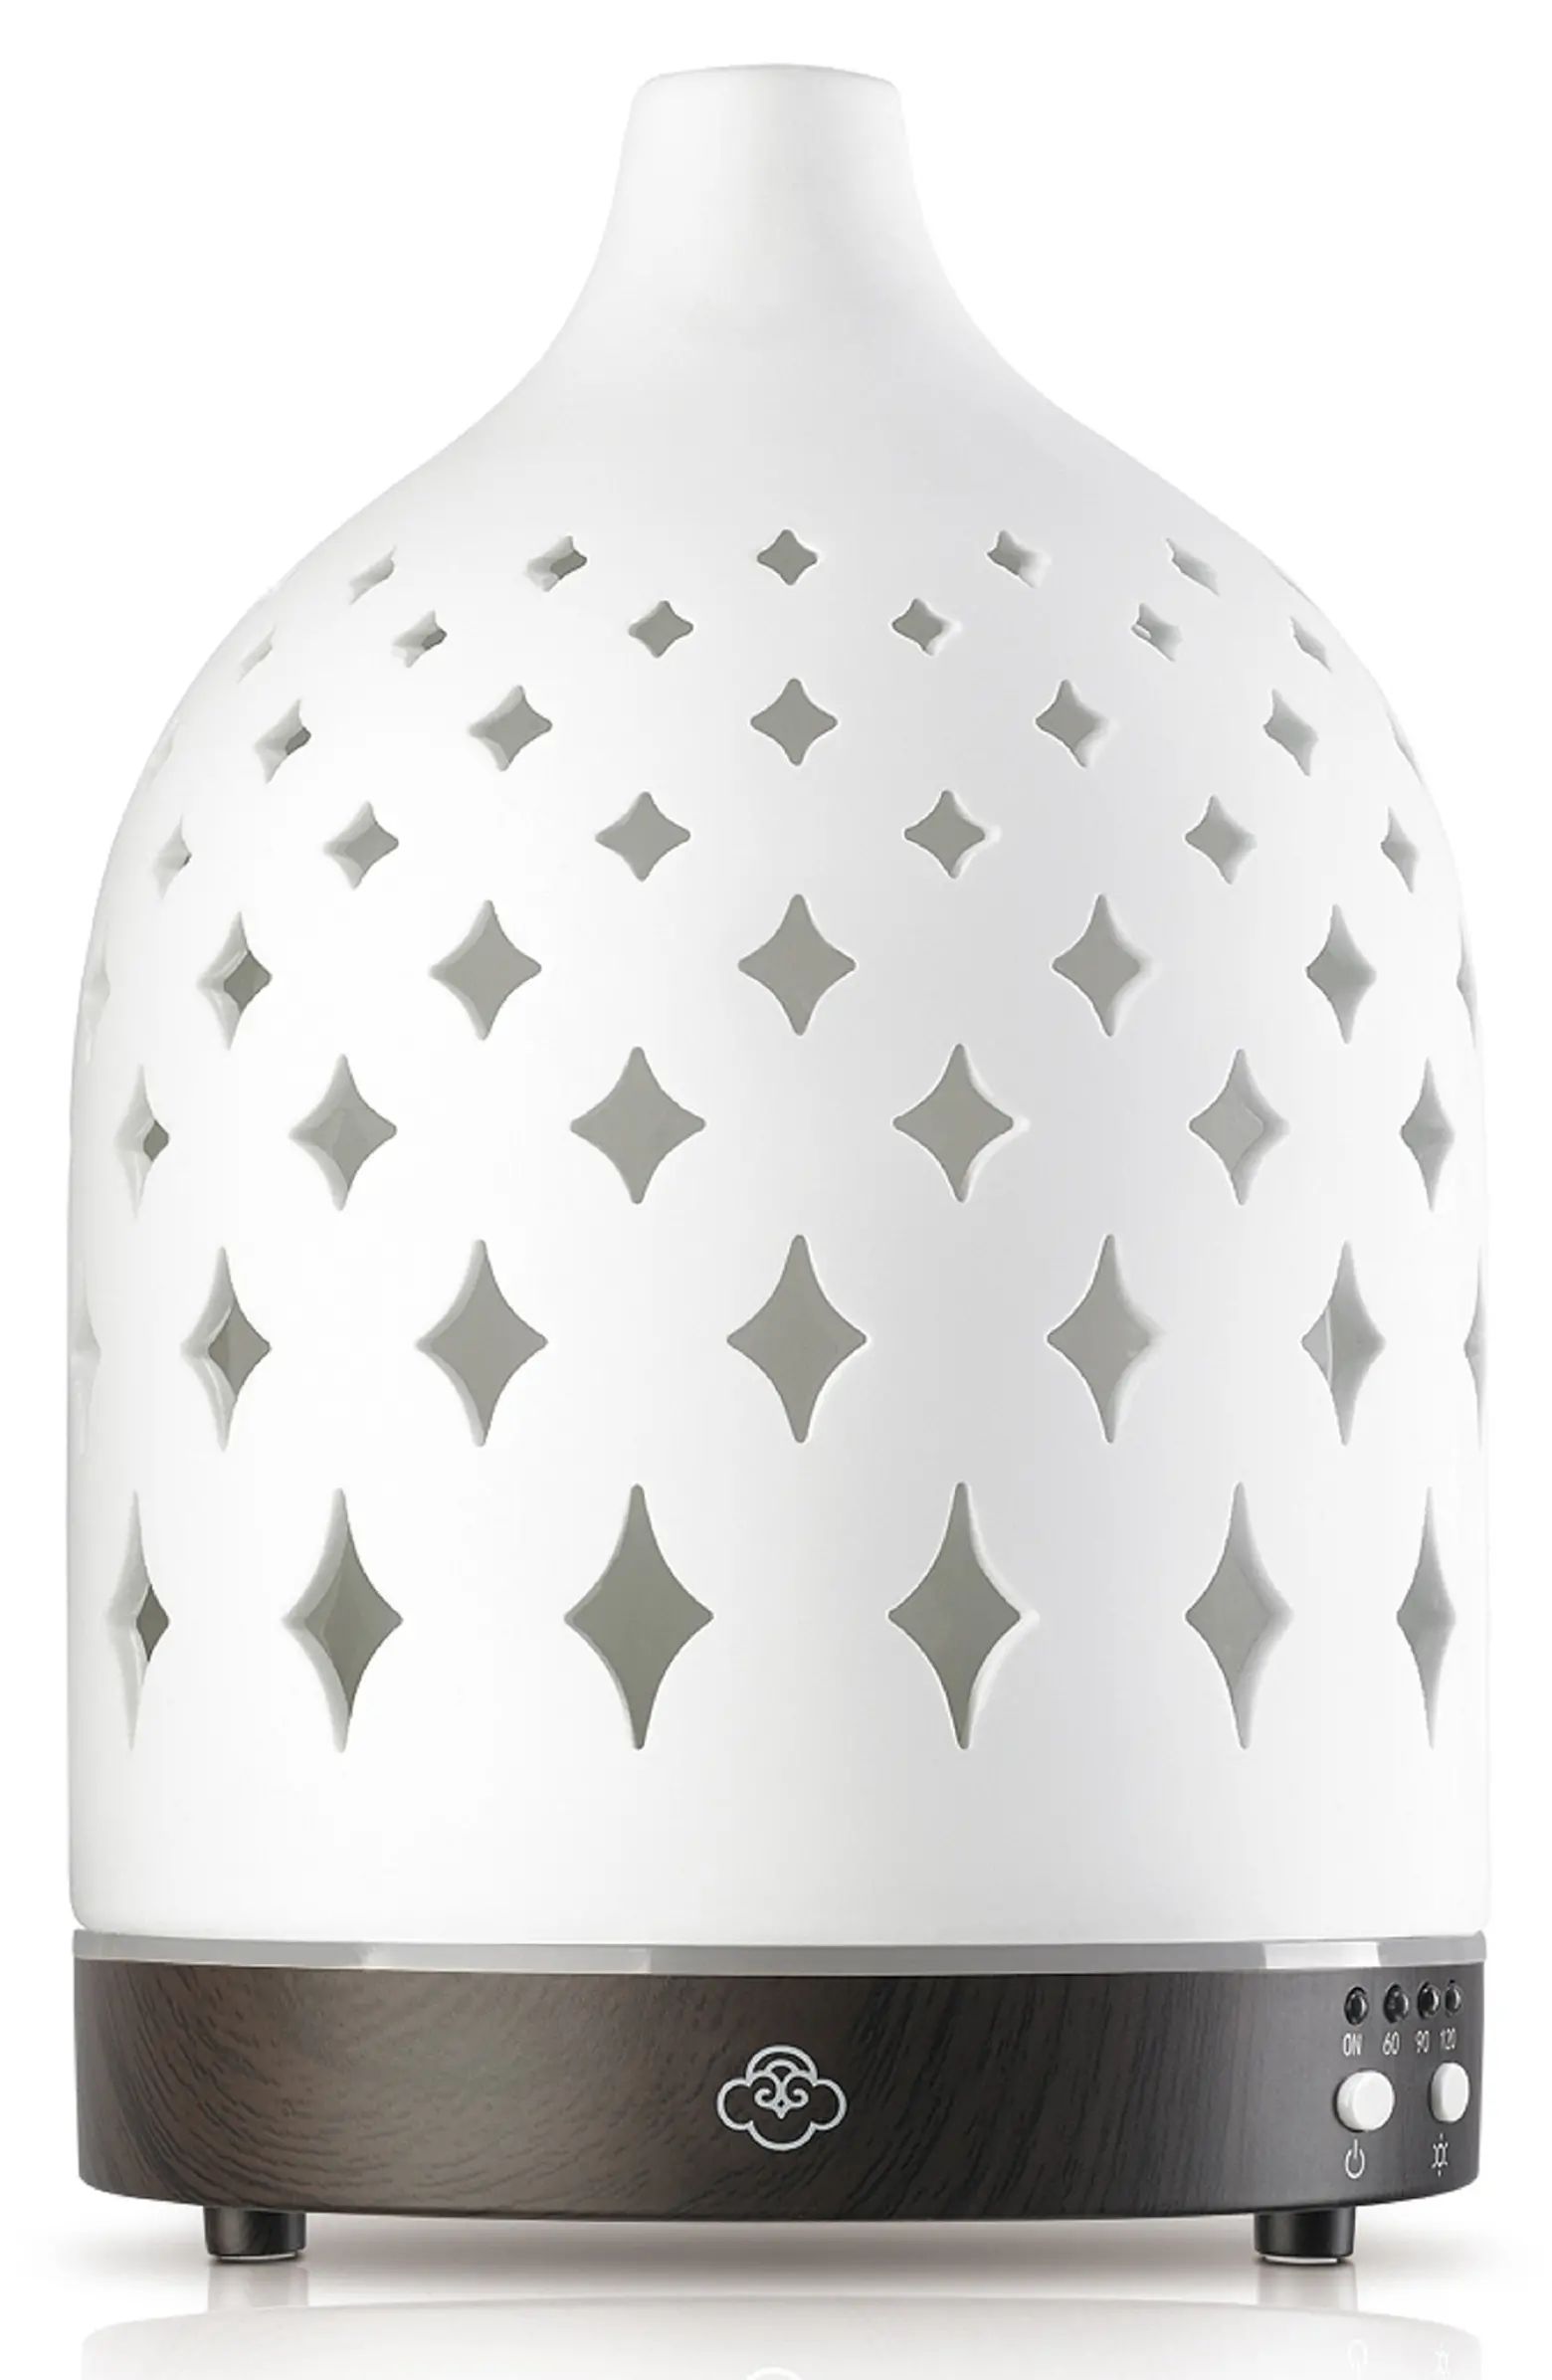 SERENE HOUSE Supernova Electric Aromatherapy Diffuser (Nordstrom Exclusive) | Nordstrom | Nordstrom